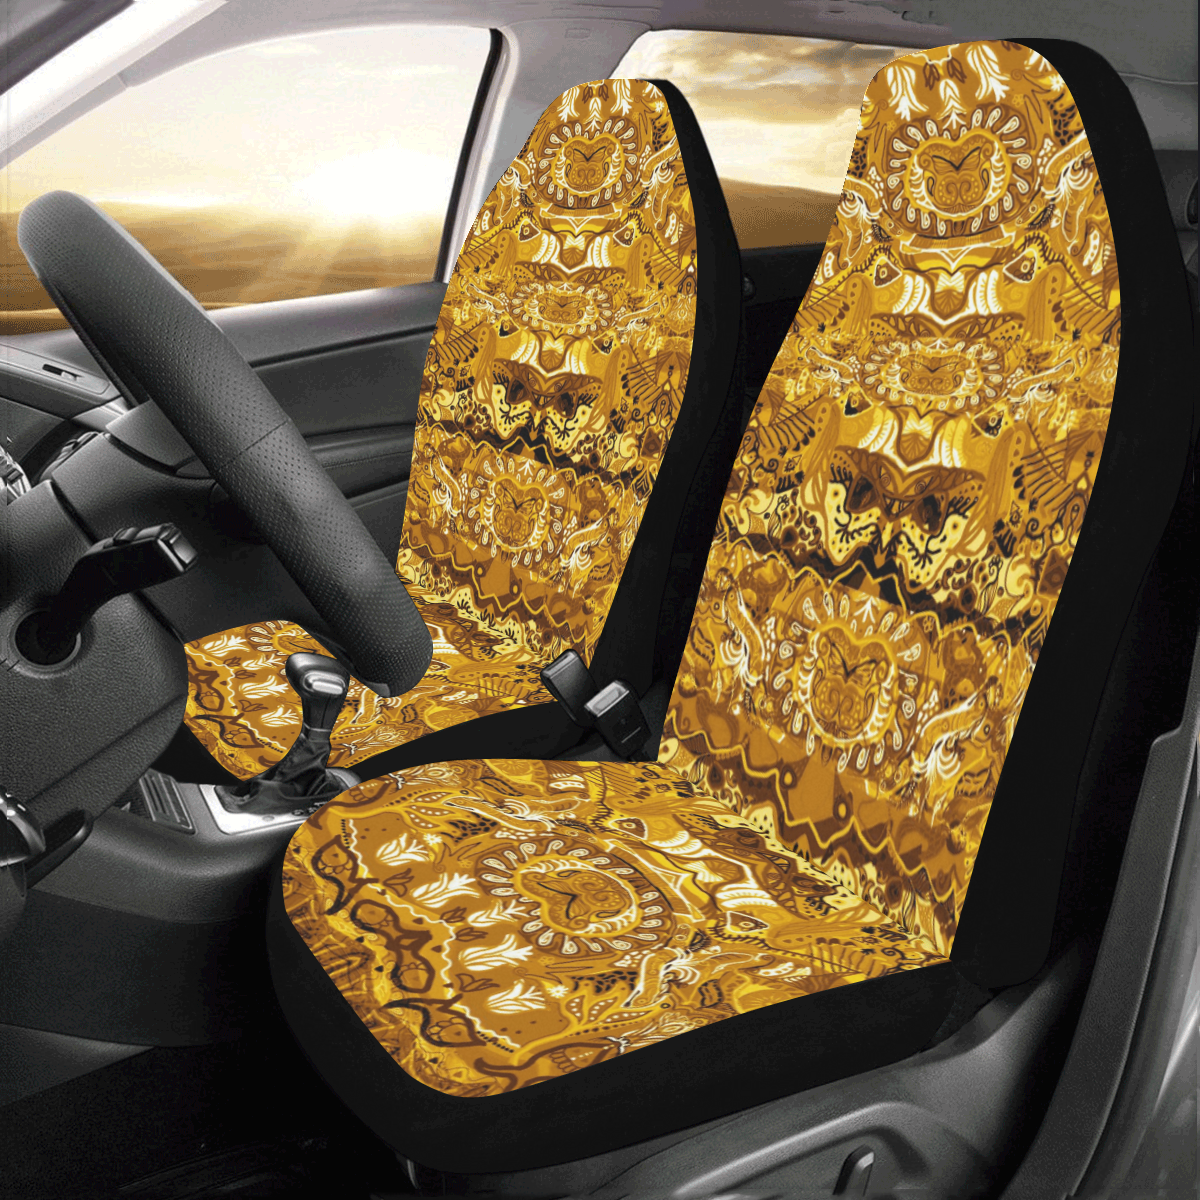 4th picasso -6 Car Seat Covers (Set of 2)